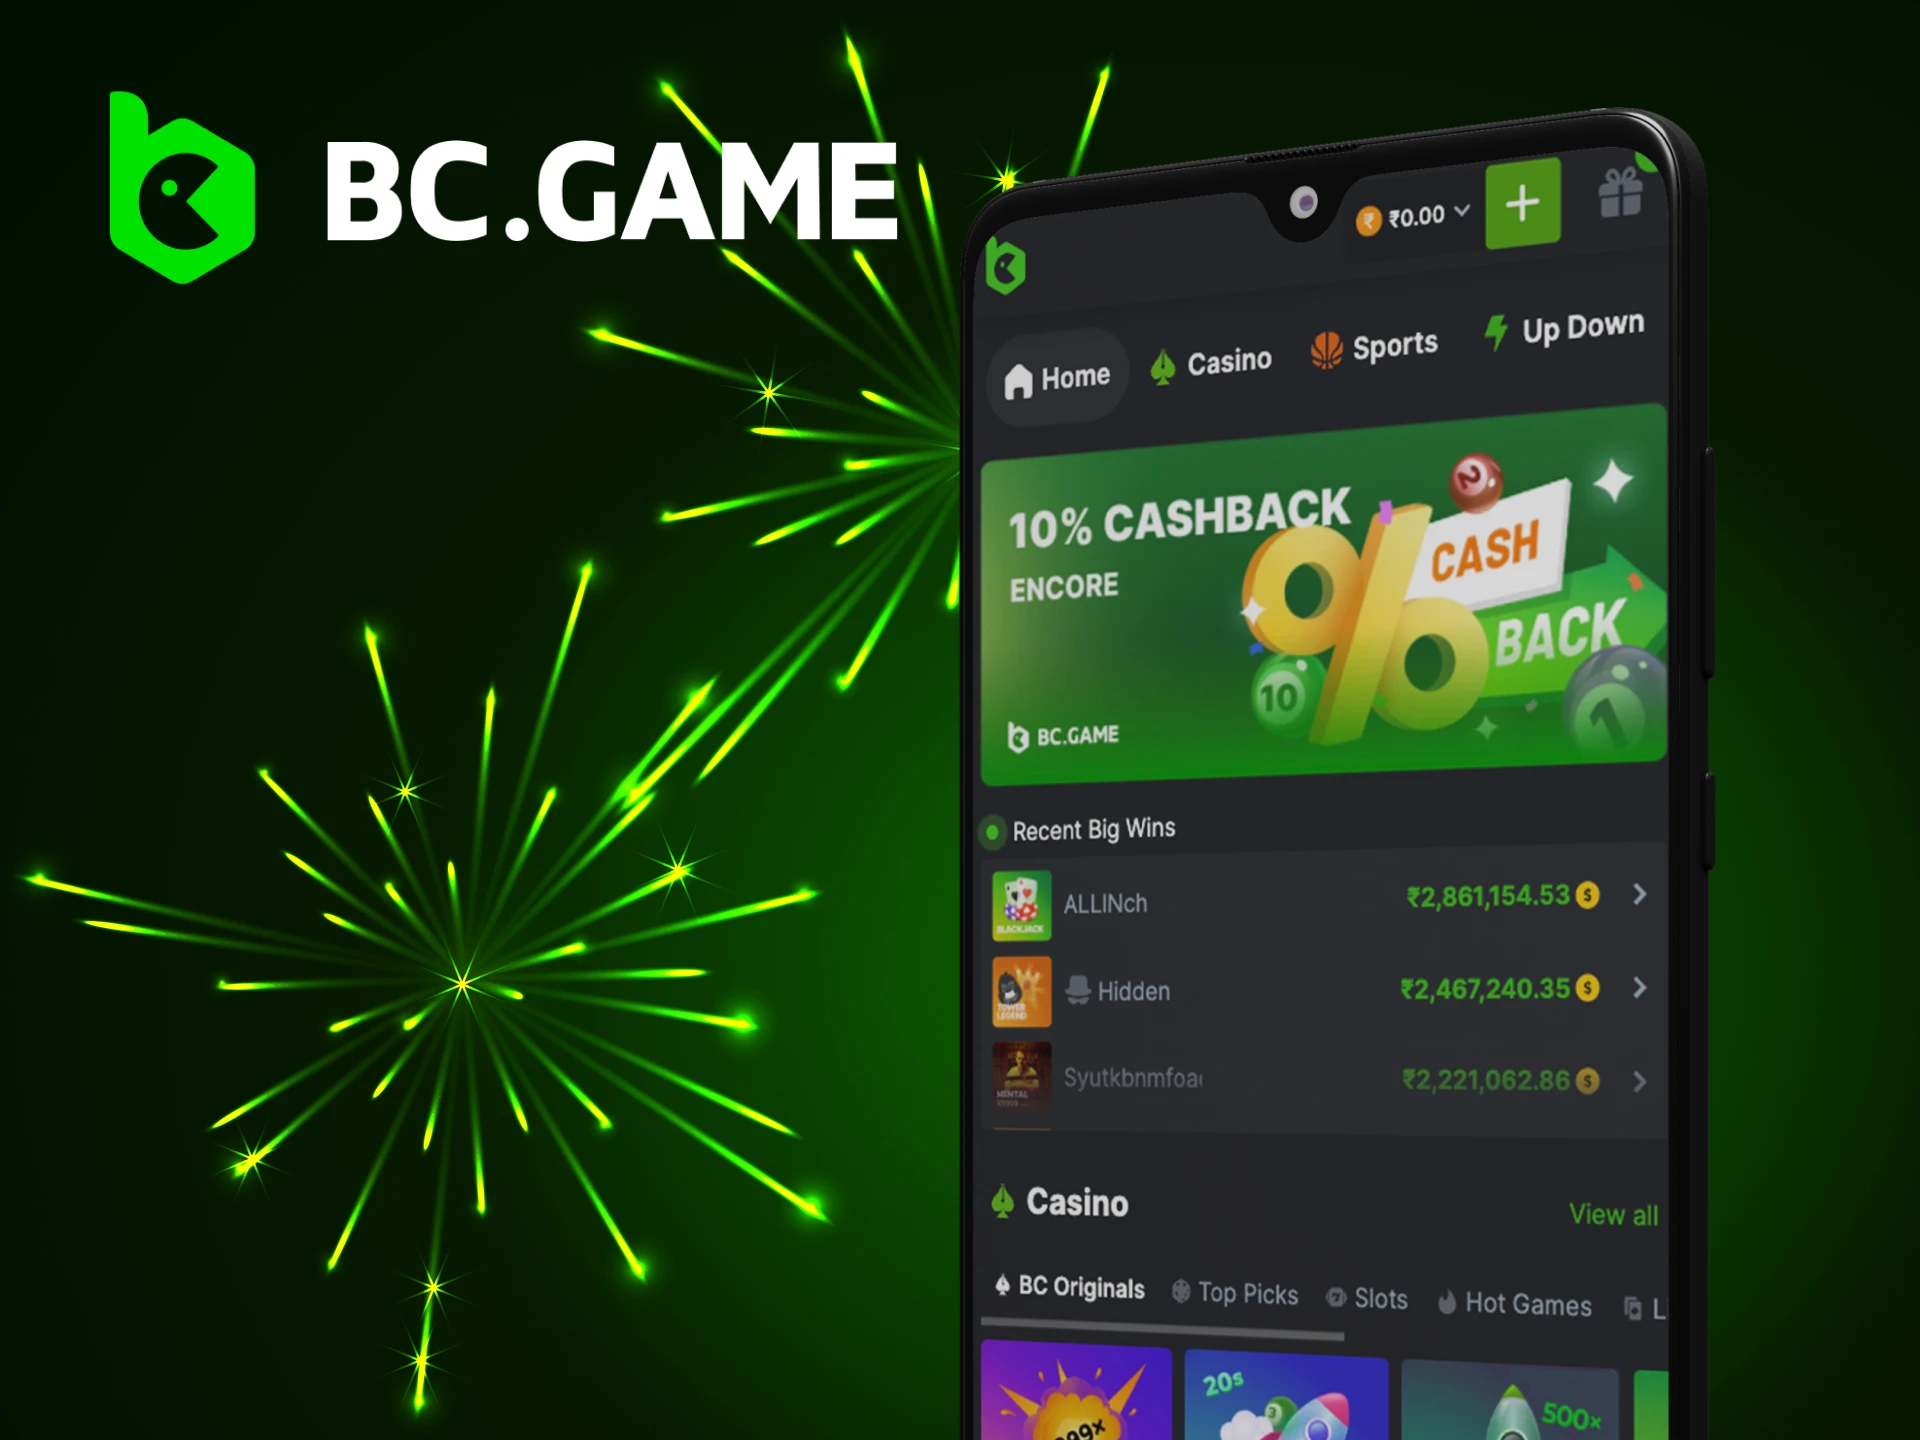 The BC Game app can be used on most Android devices.